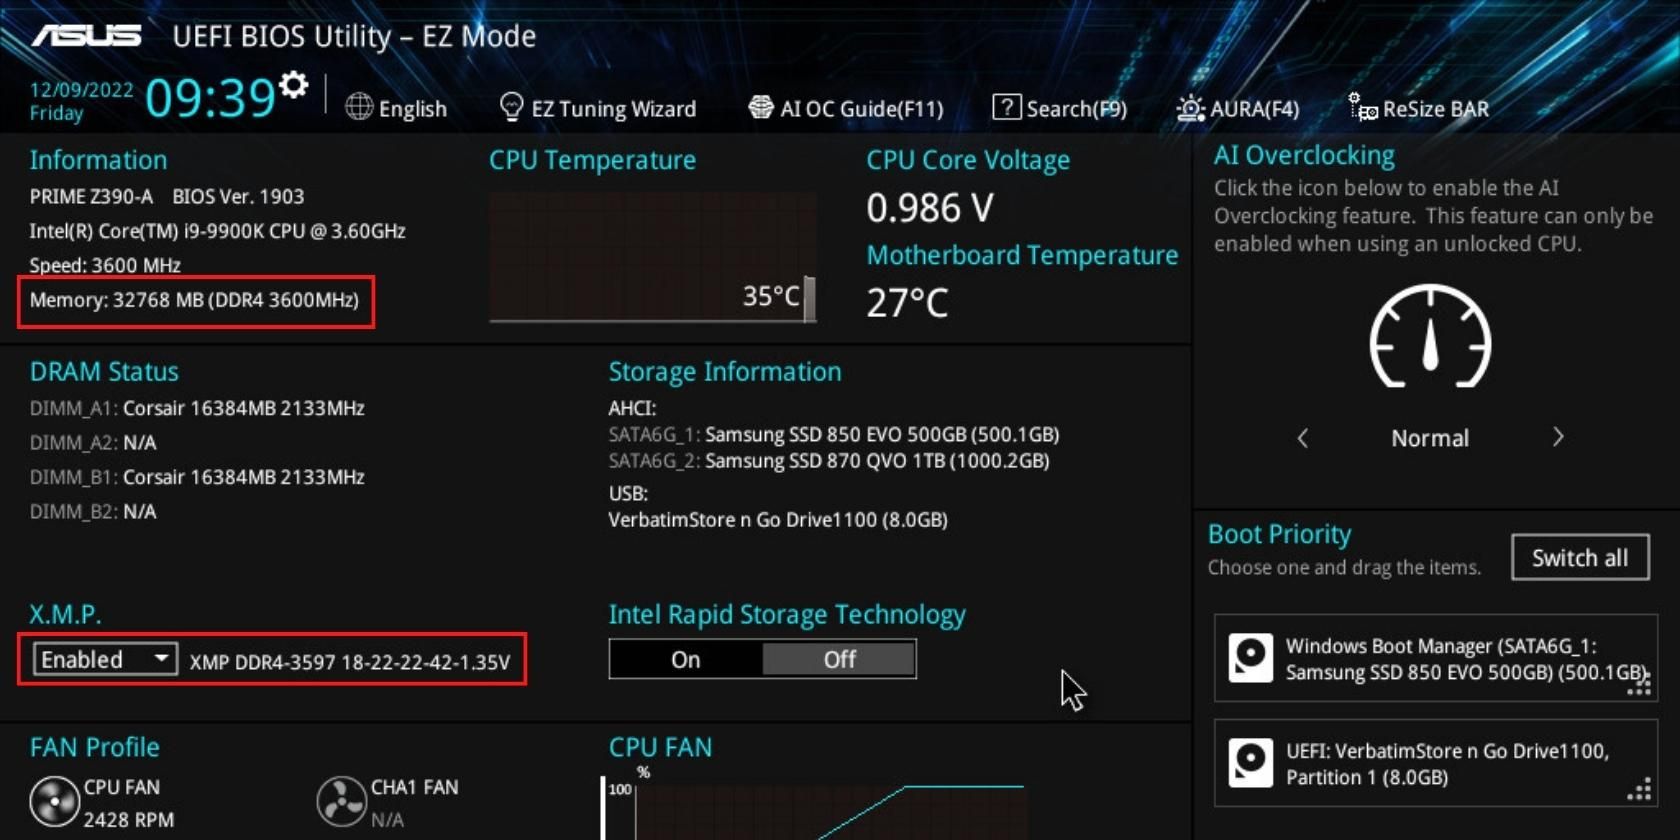 ASUS BIOS showing RAM speed with XMP enabled